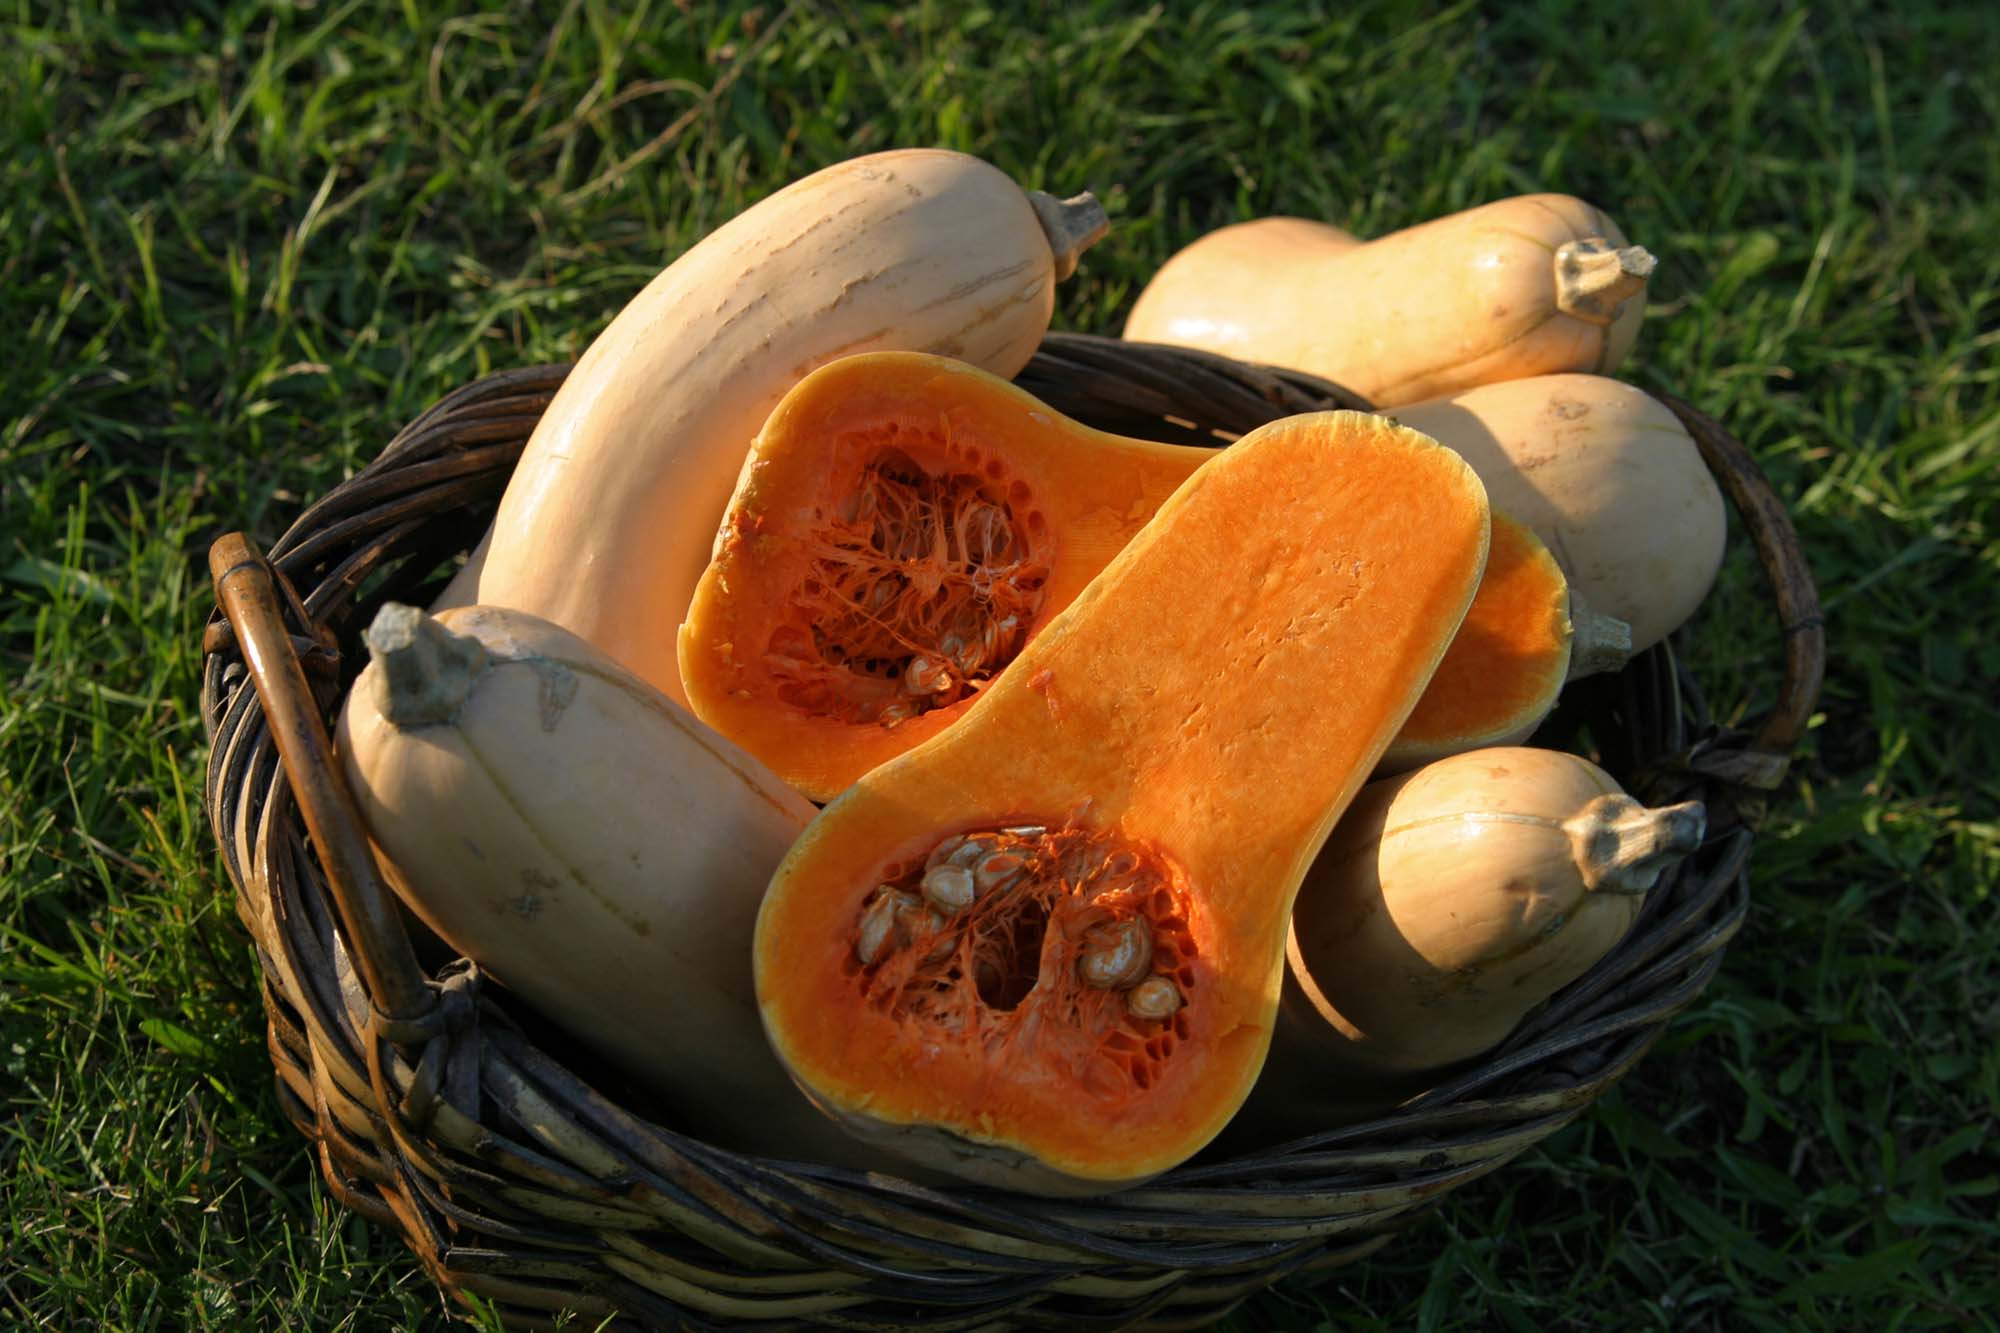 Try farm stands and markets for butternut squash this time of year.